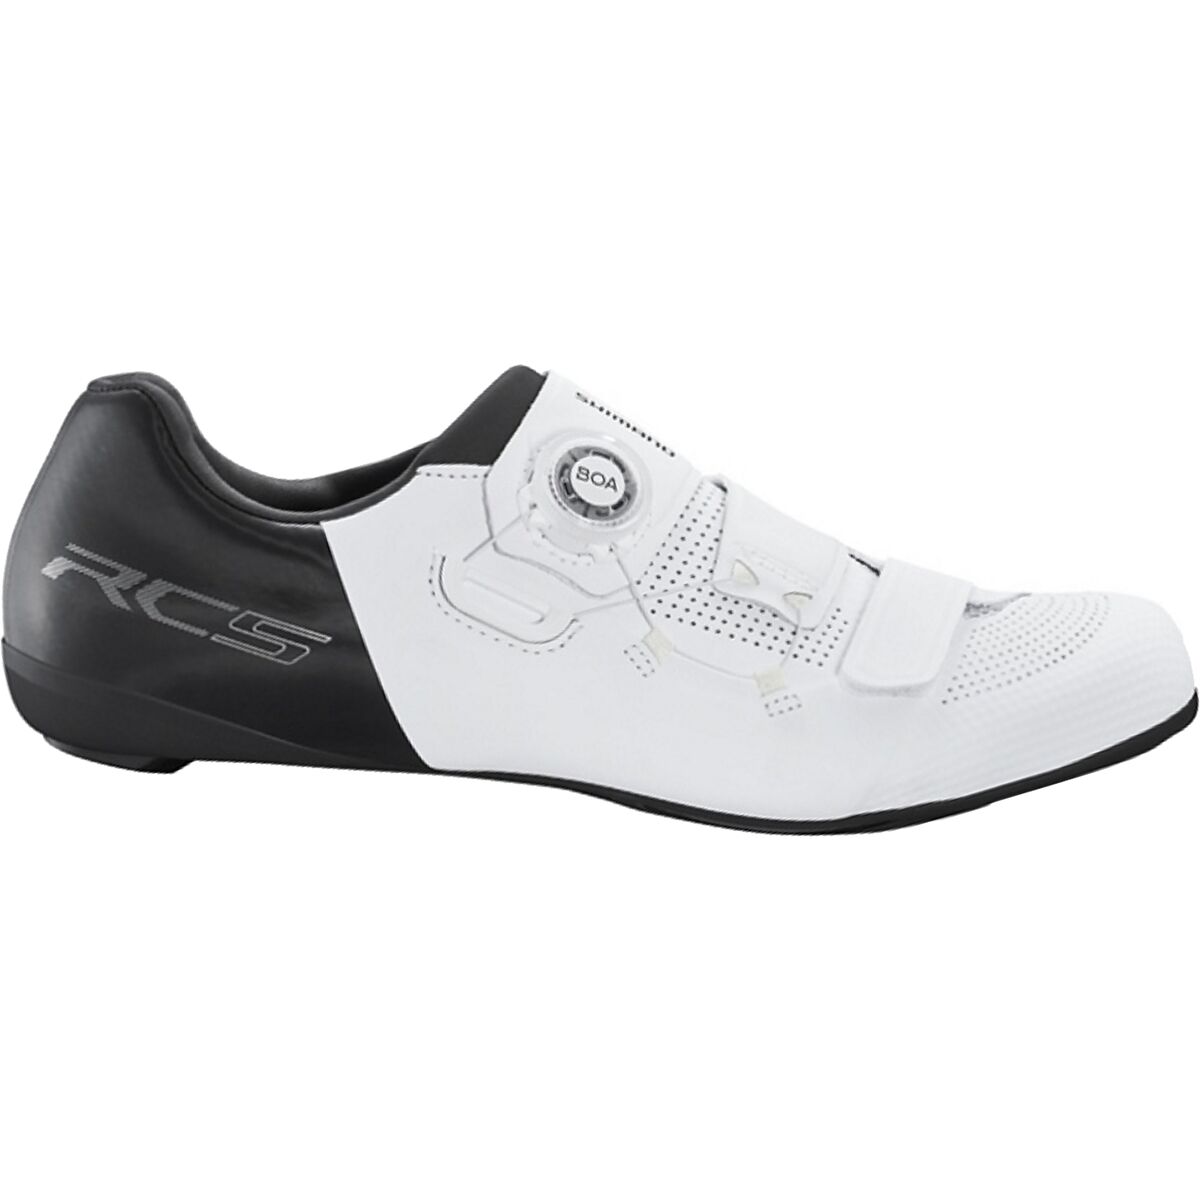 Shimano RC5 Limited Edition Cycling Shoe - Men's